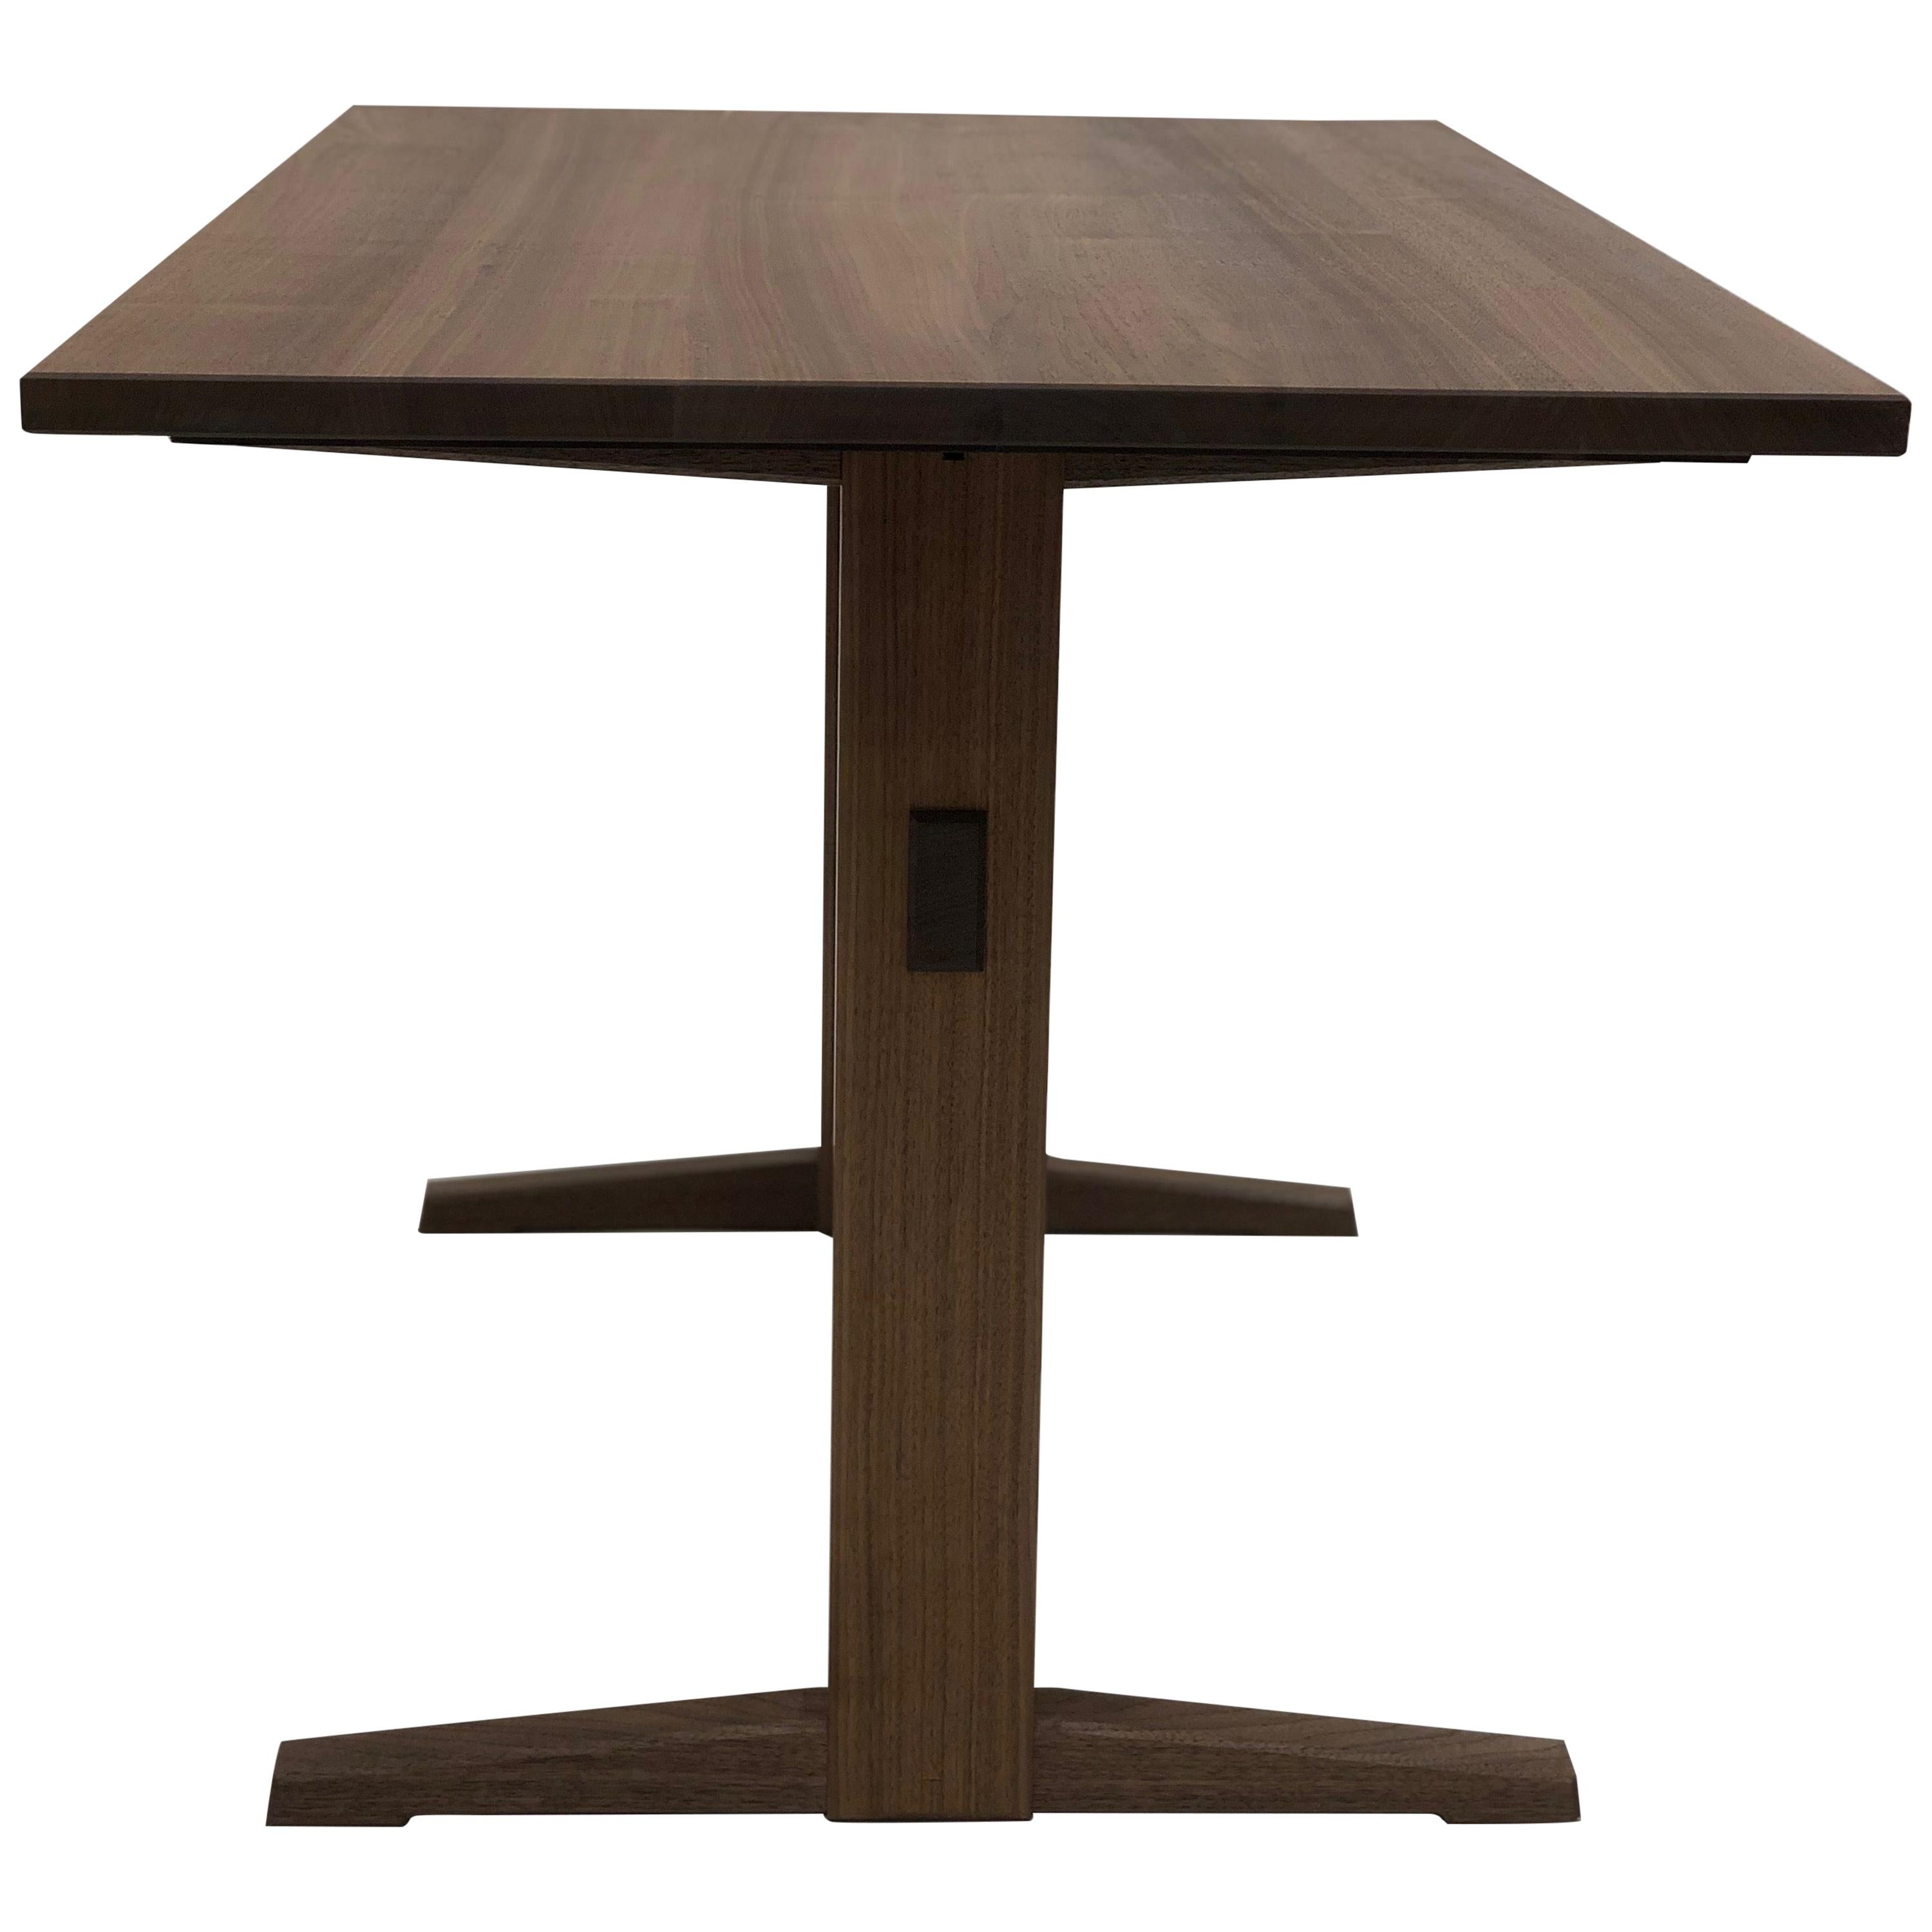 Trestle Base Dining Table in Quartersawn Walnut by Brian Holcombe